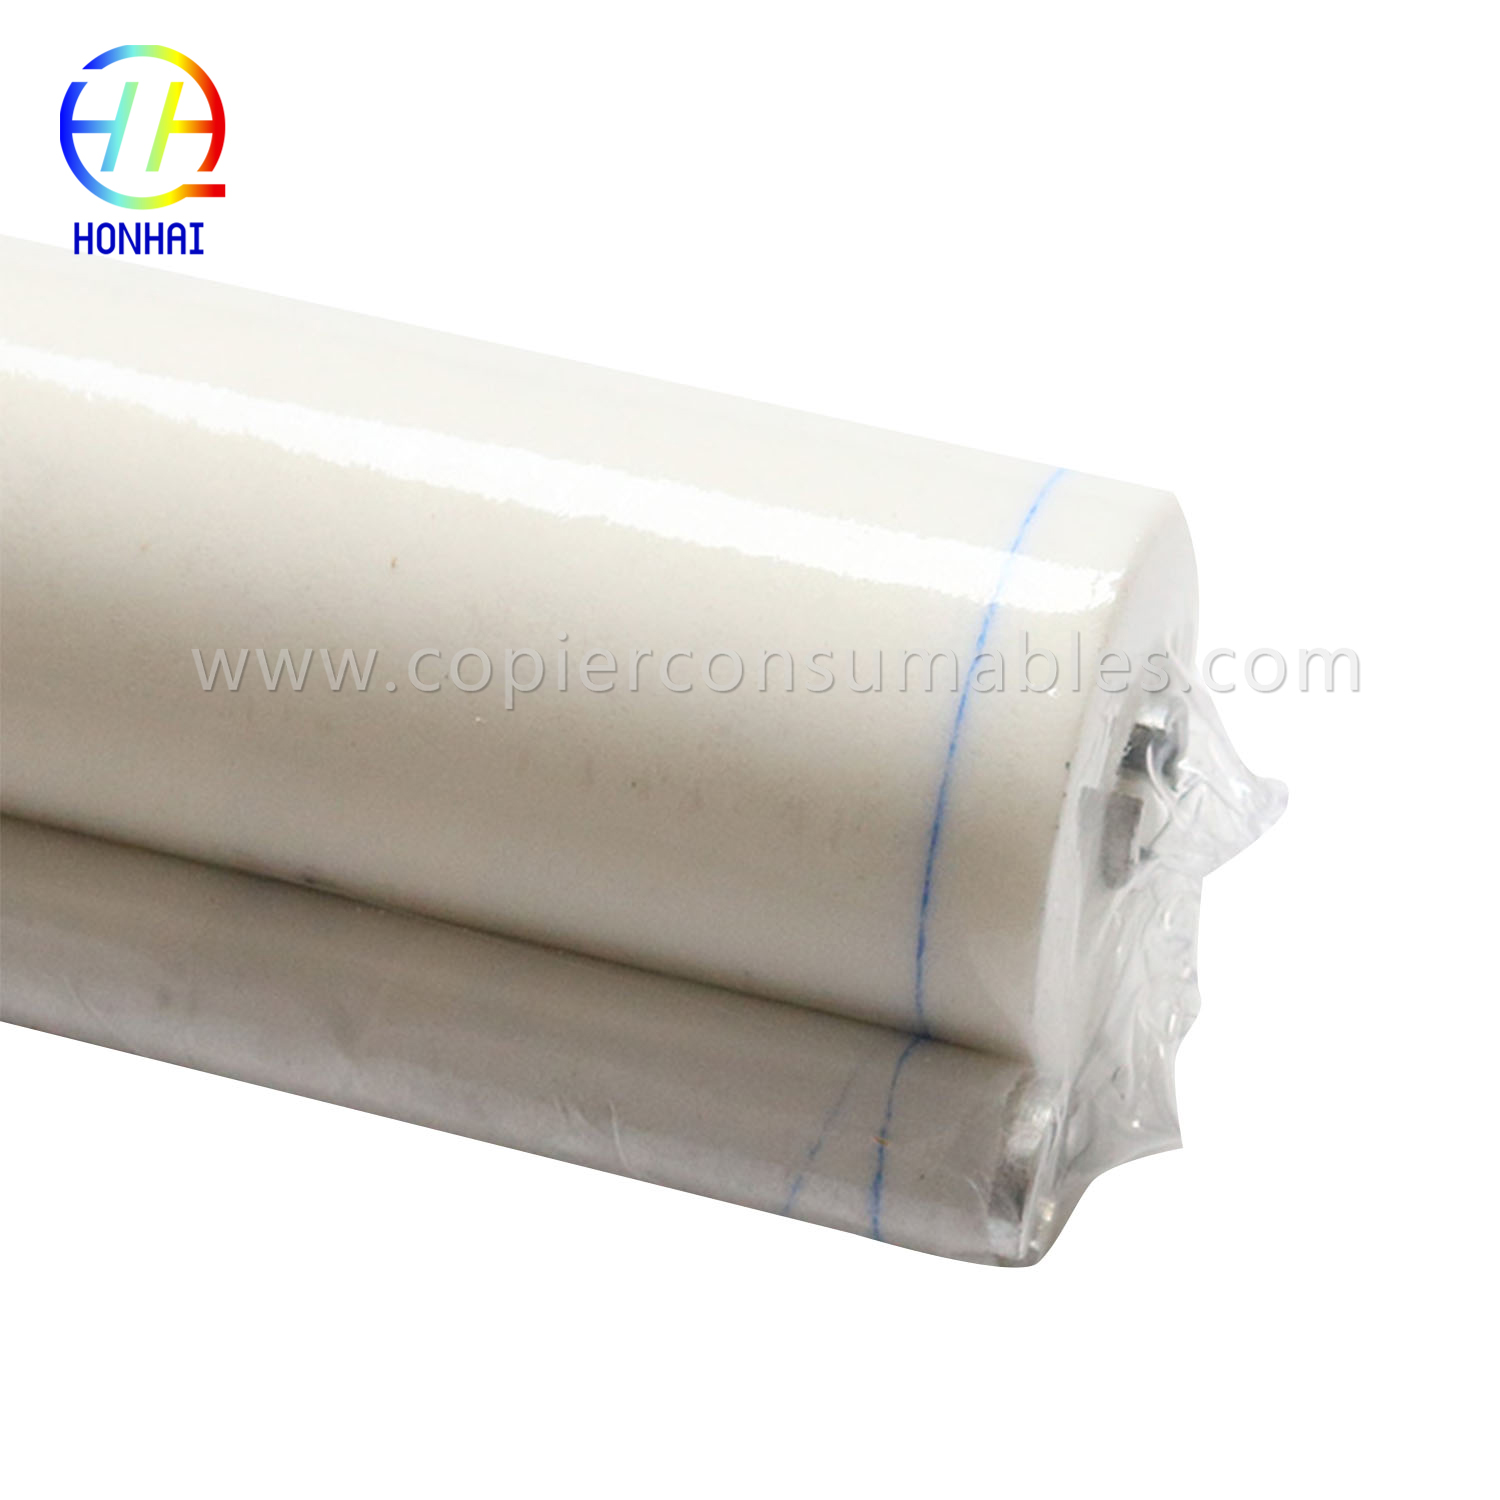 Web Cleaning Roller for Canon imageRUNNER 105 5000 5020 5050 5055 5065 5070 5075 550 5575 600 6000 6020 6570 7086 7065 7105 7200 8500 9070 (FY1-1157-000) 拷贝